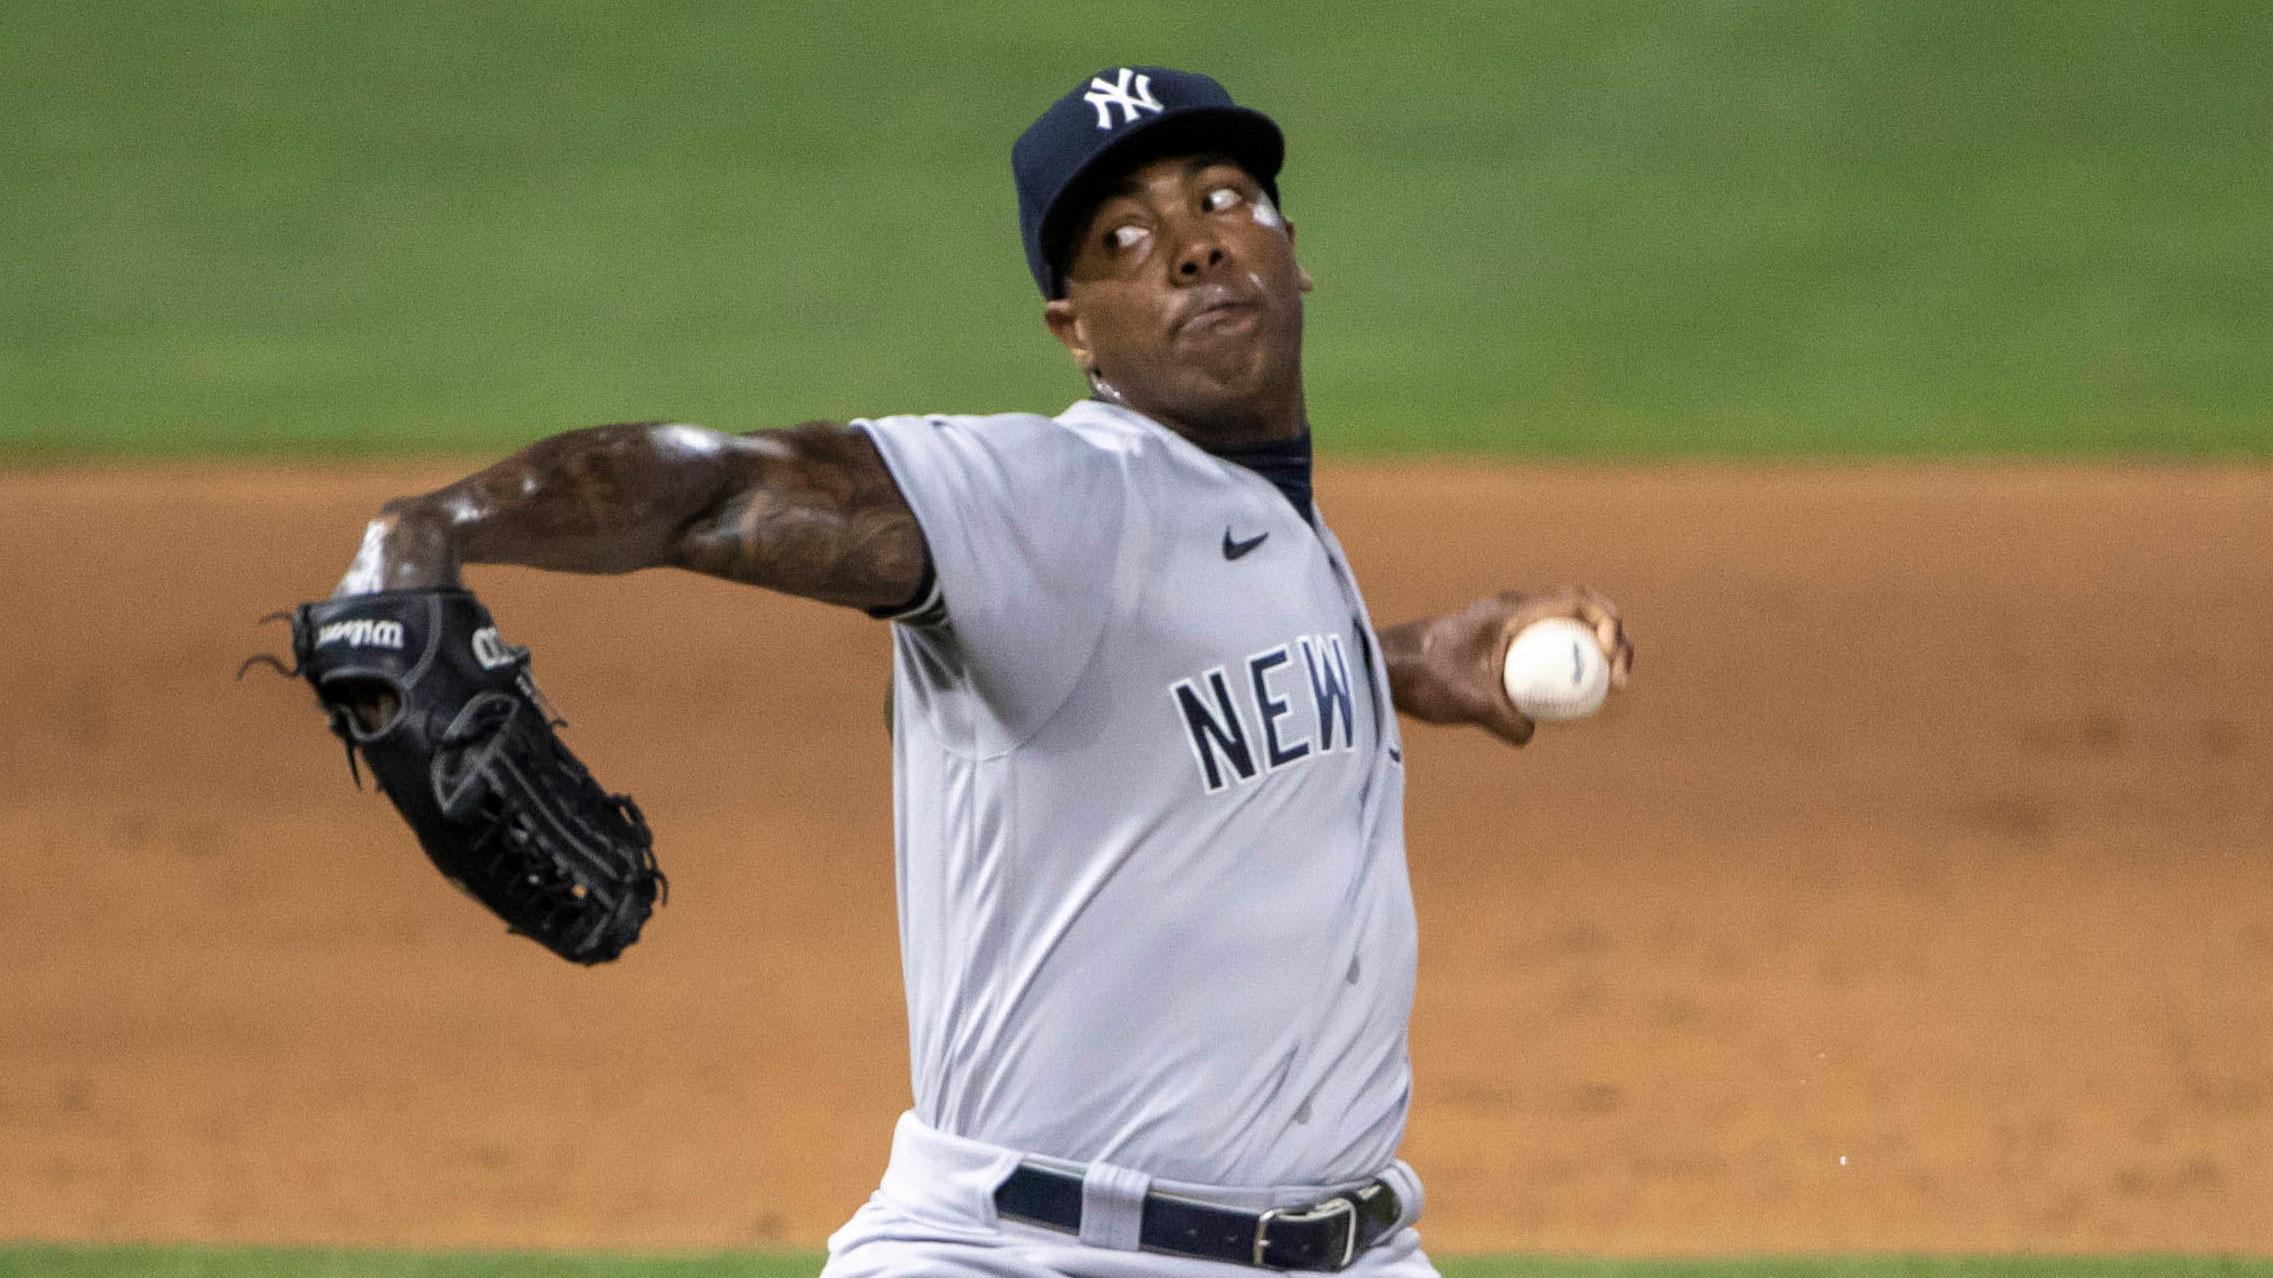 Jun 10, 2021; Minneapolis, Minnesota, USA; New York Yankees relief pitcher Aroldis Chapman (54) delivers a pitch in the ninth inning against the Minnesota Twins at Target Field. / Jesse Johnson-USA TODAY Sports